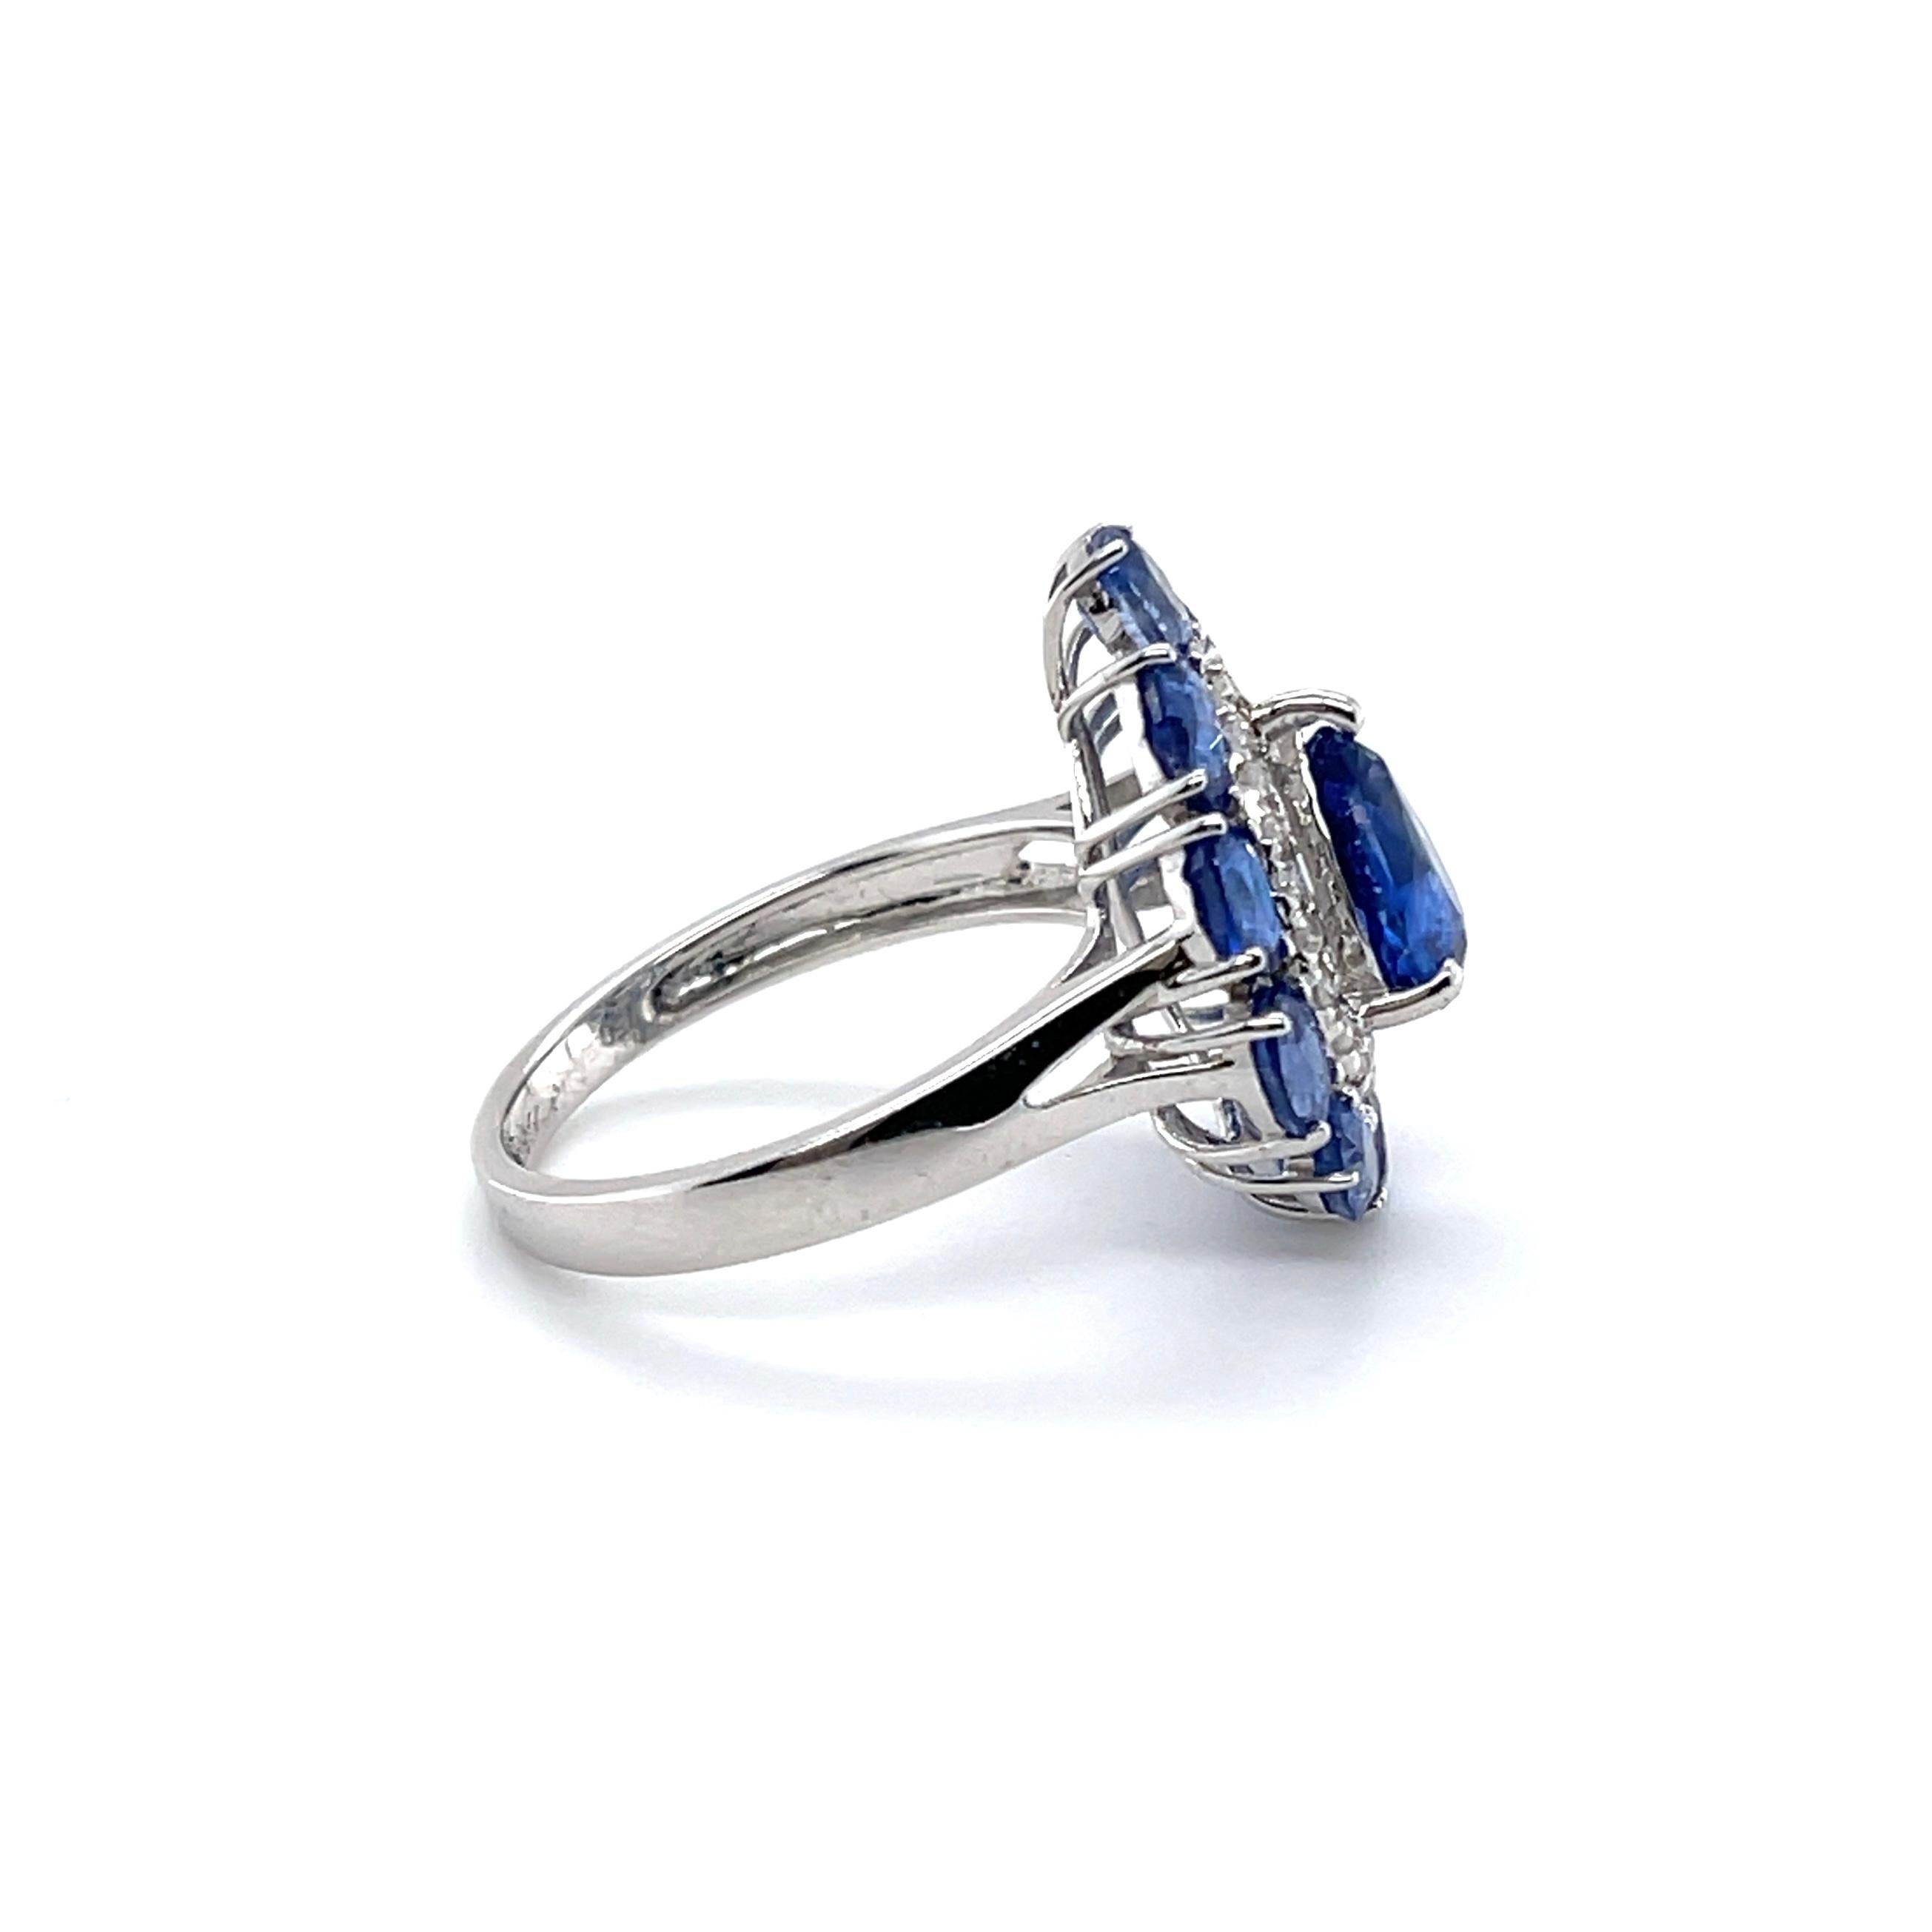 For Sale:  18ct White Gold Ring with 1.48ct Kyanite and Diamond 2